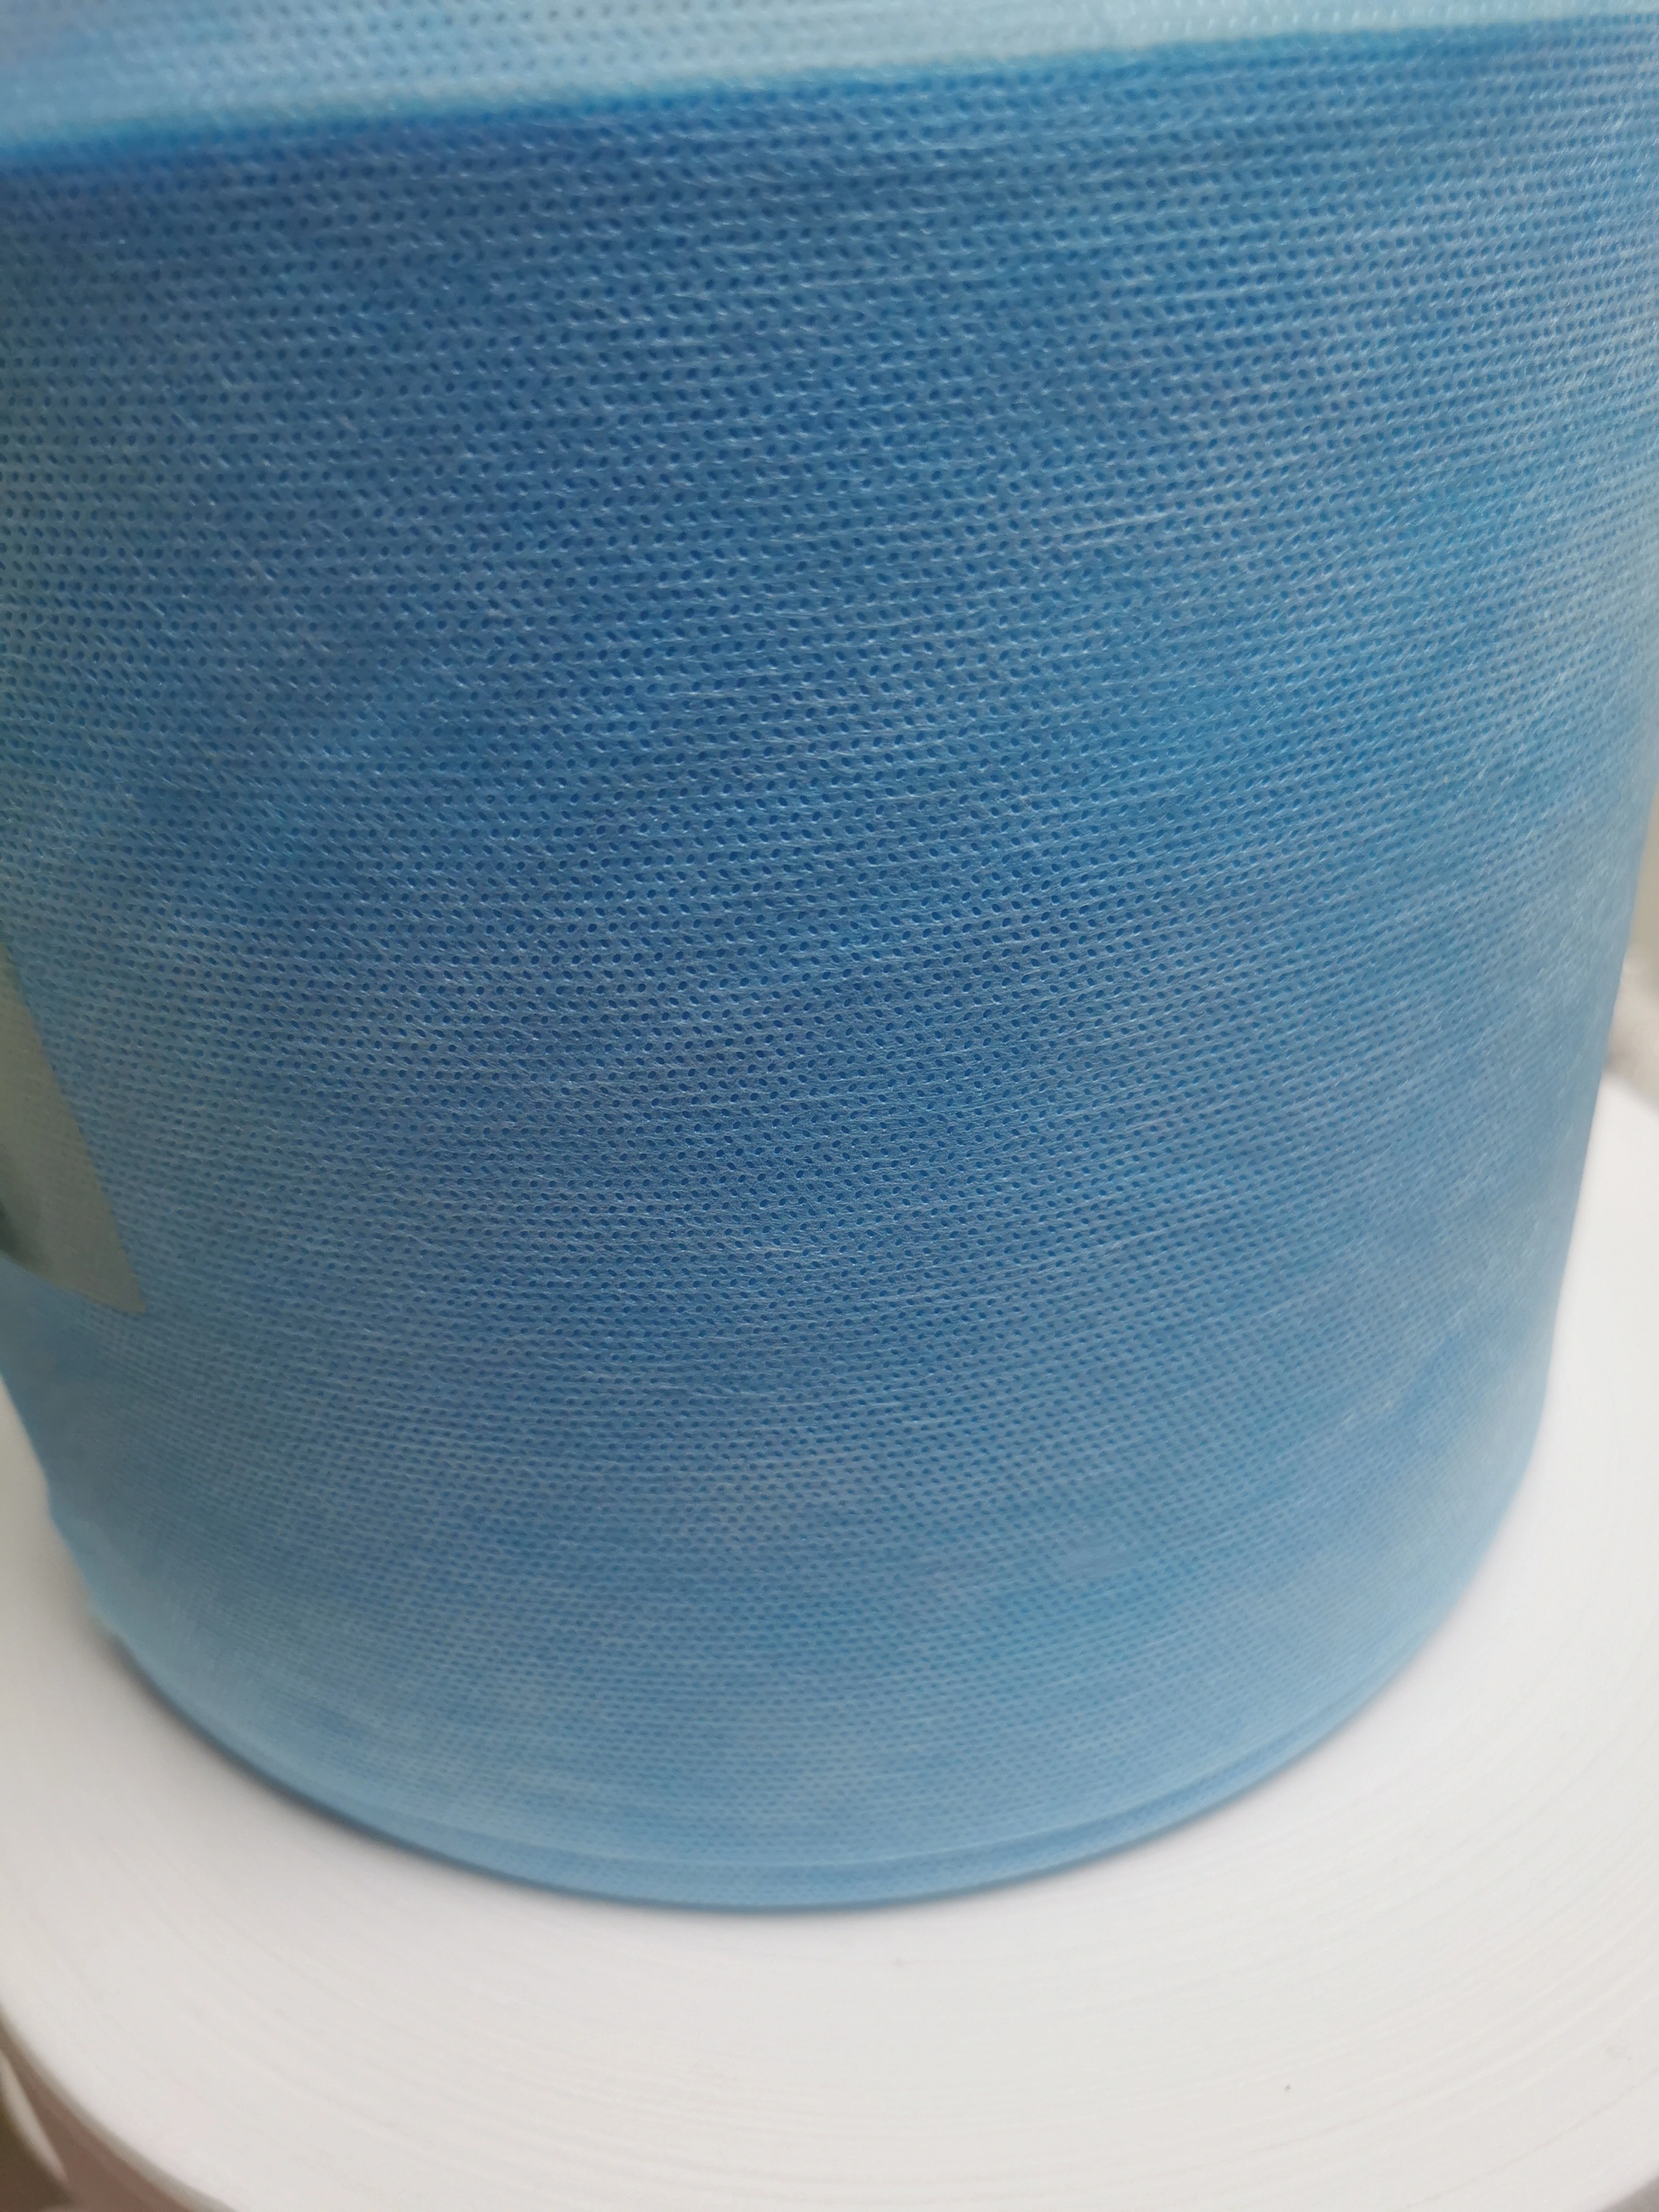 2020 Hotest Product of SSS 100% PP Spunbond Non Woven Fabric for Medical Hygiene